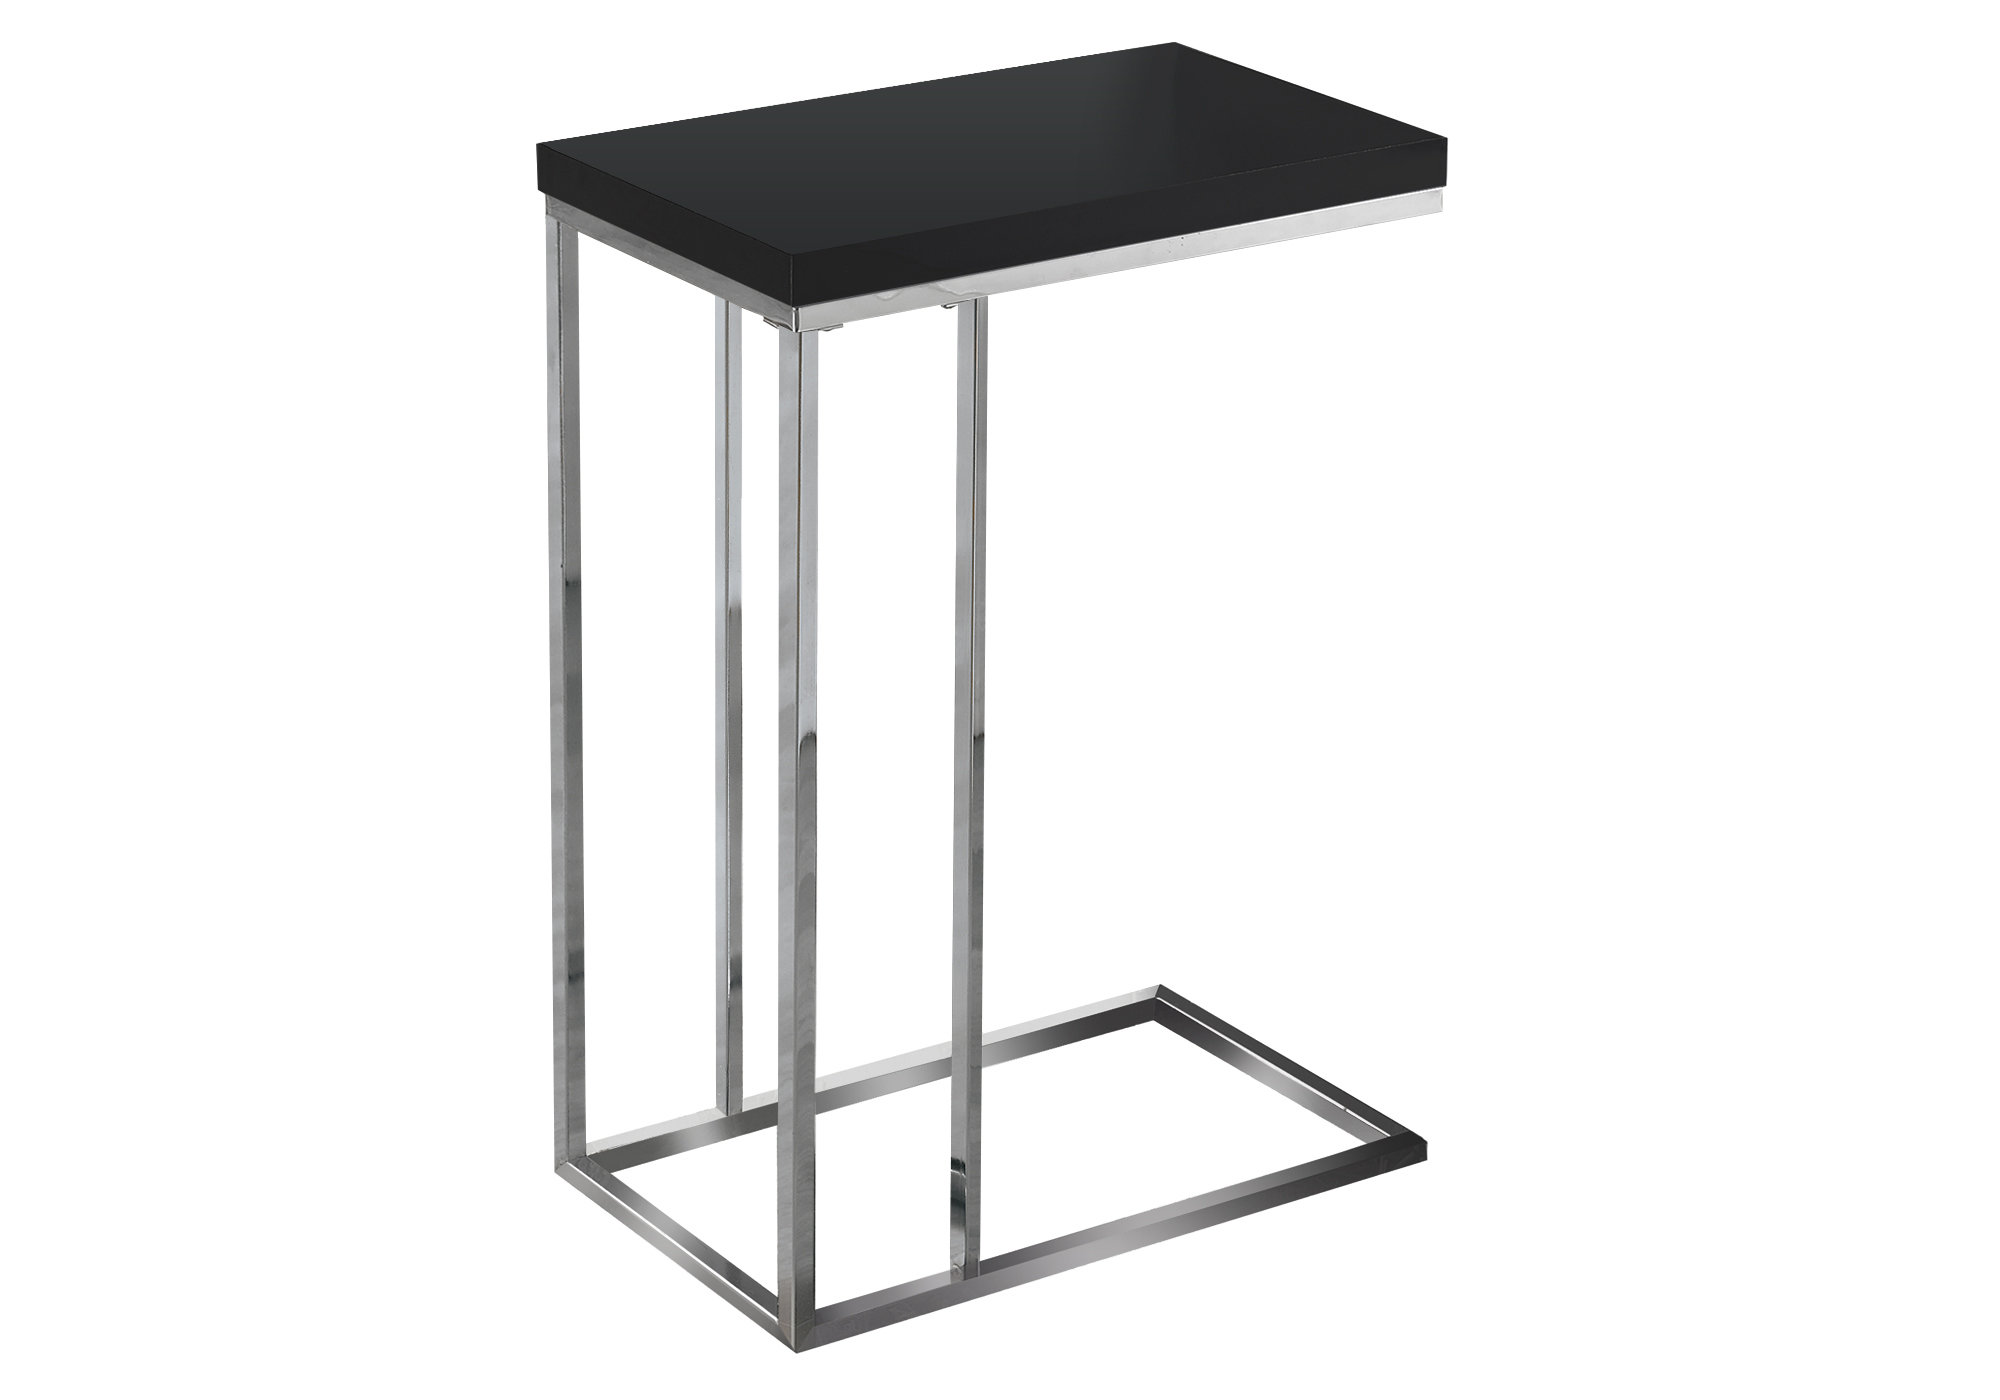 18.25" x 10.25" x 25.25" Black Particle Board Metal Accent Table